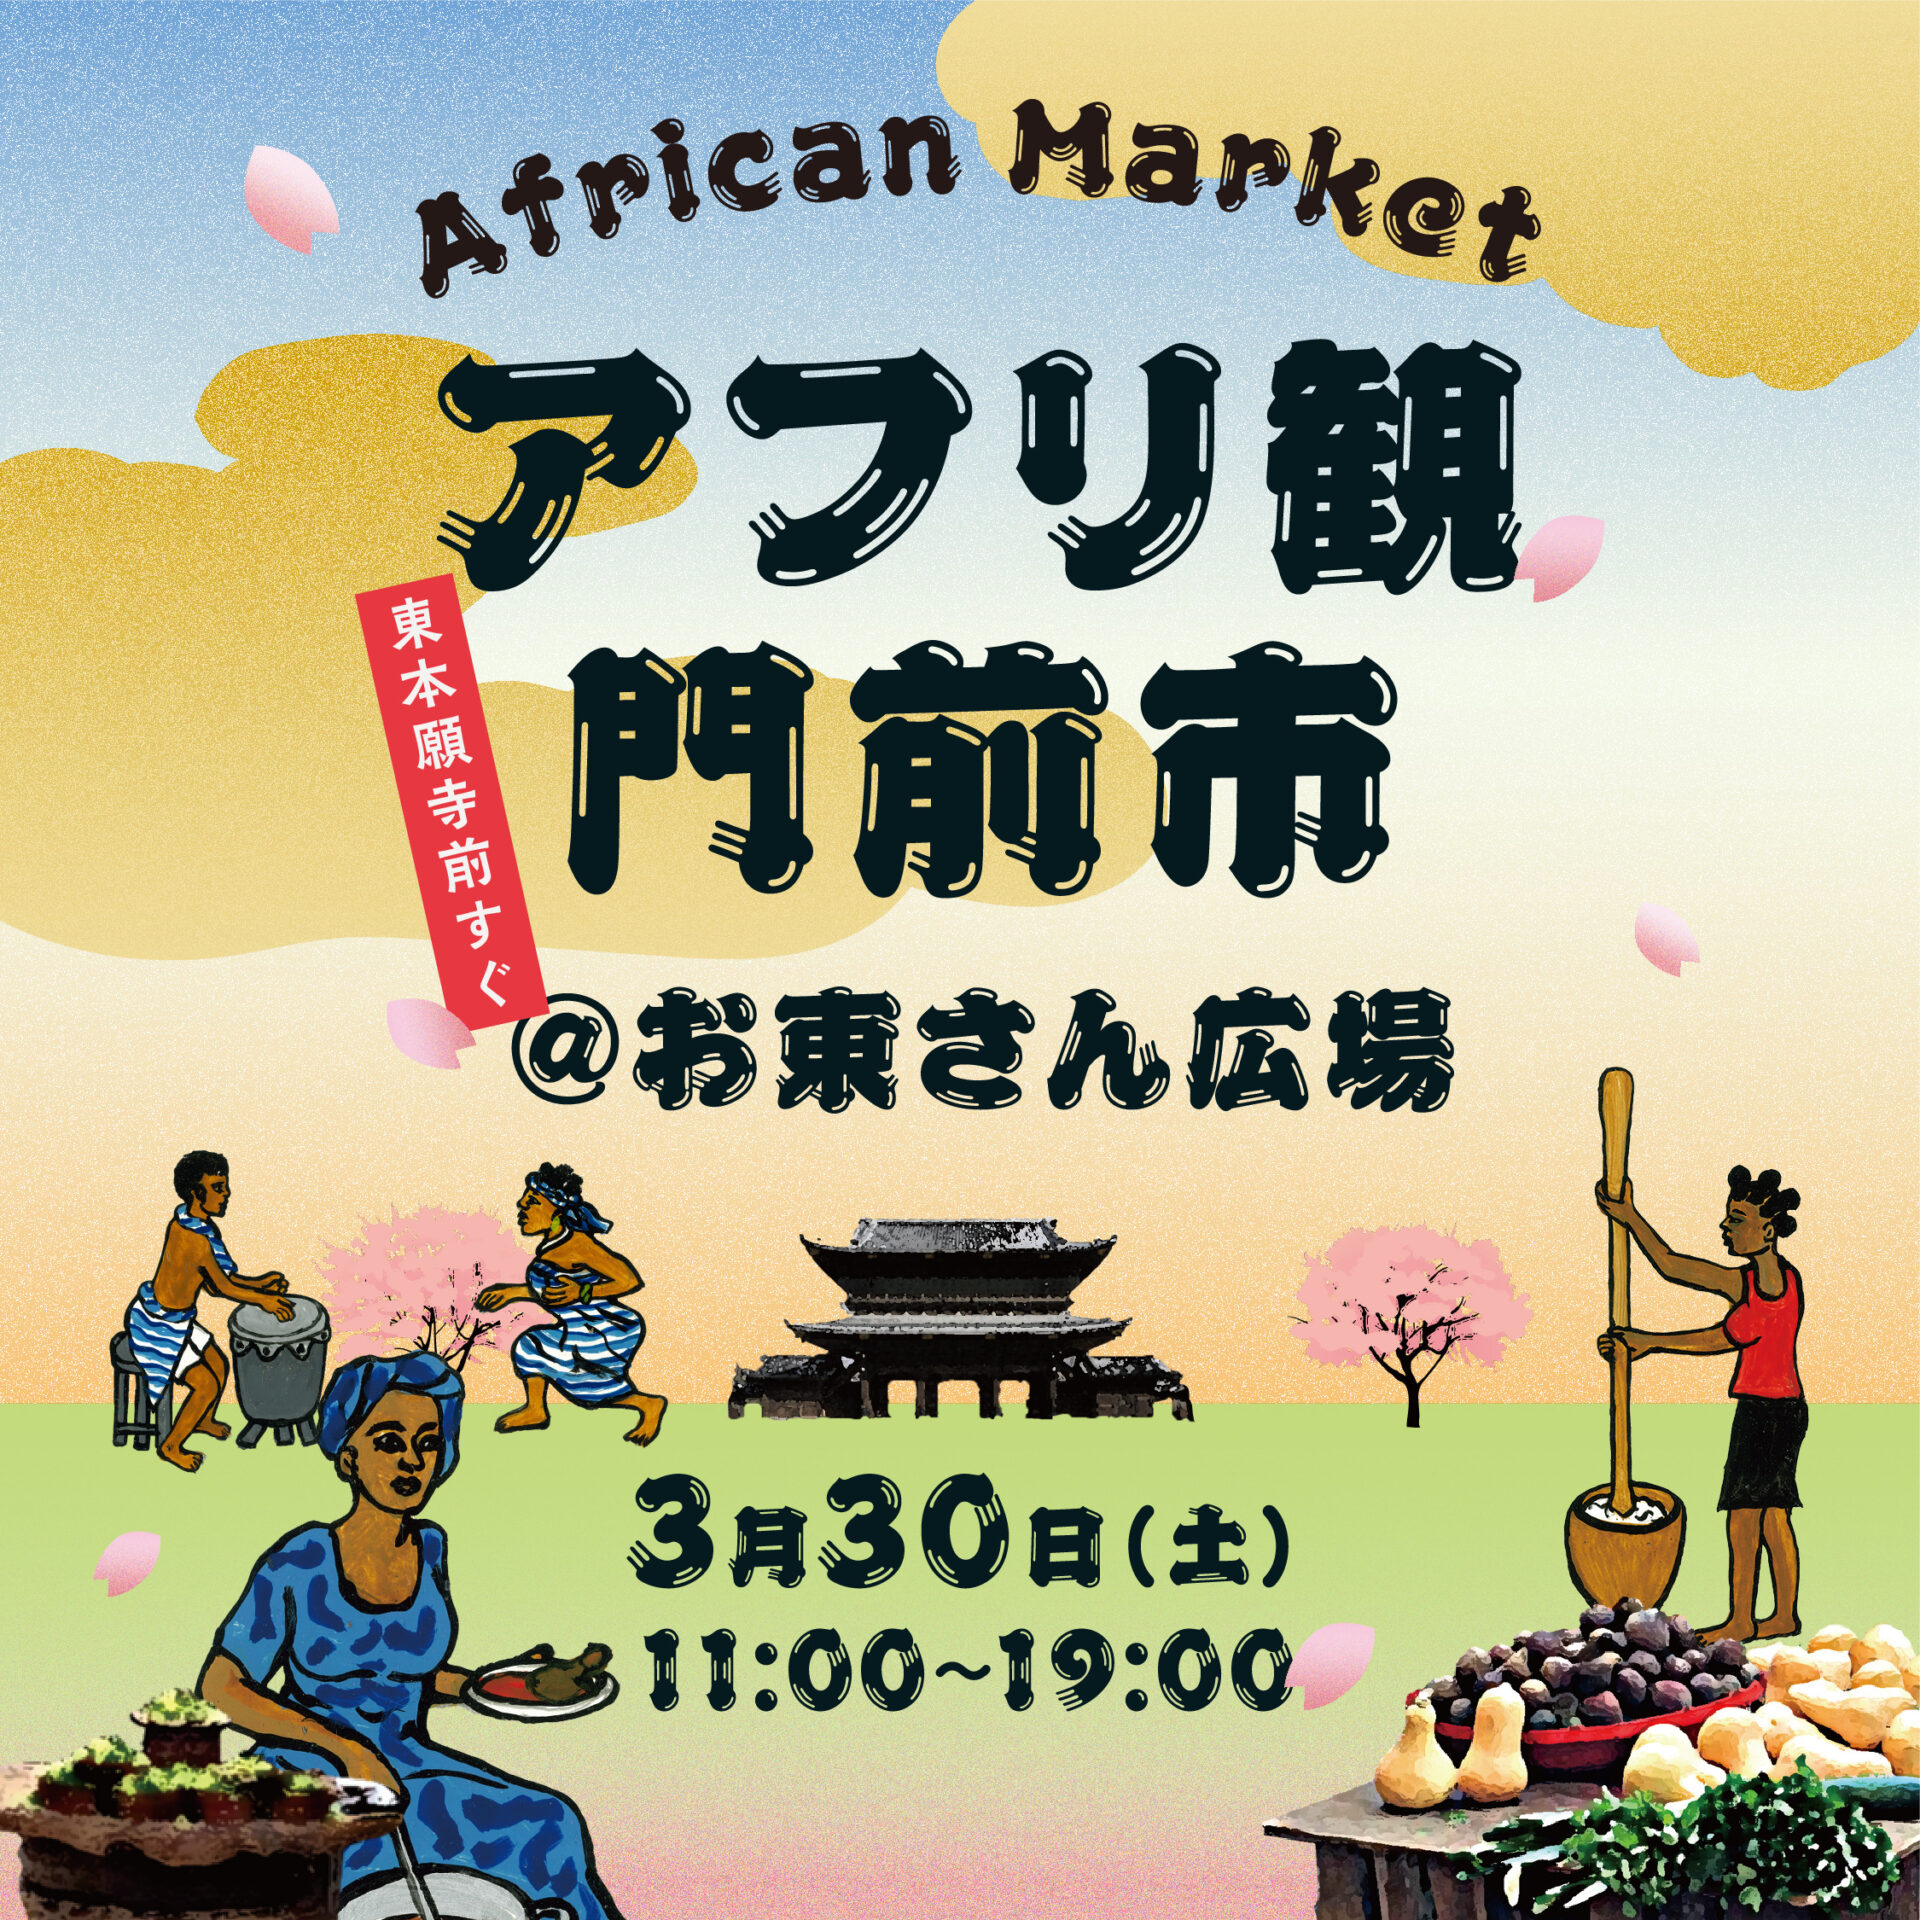 African Market  アフリ観門前市＠お東さん広場